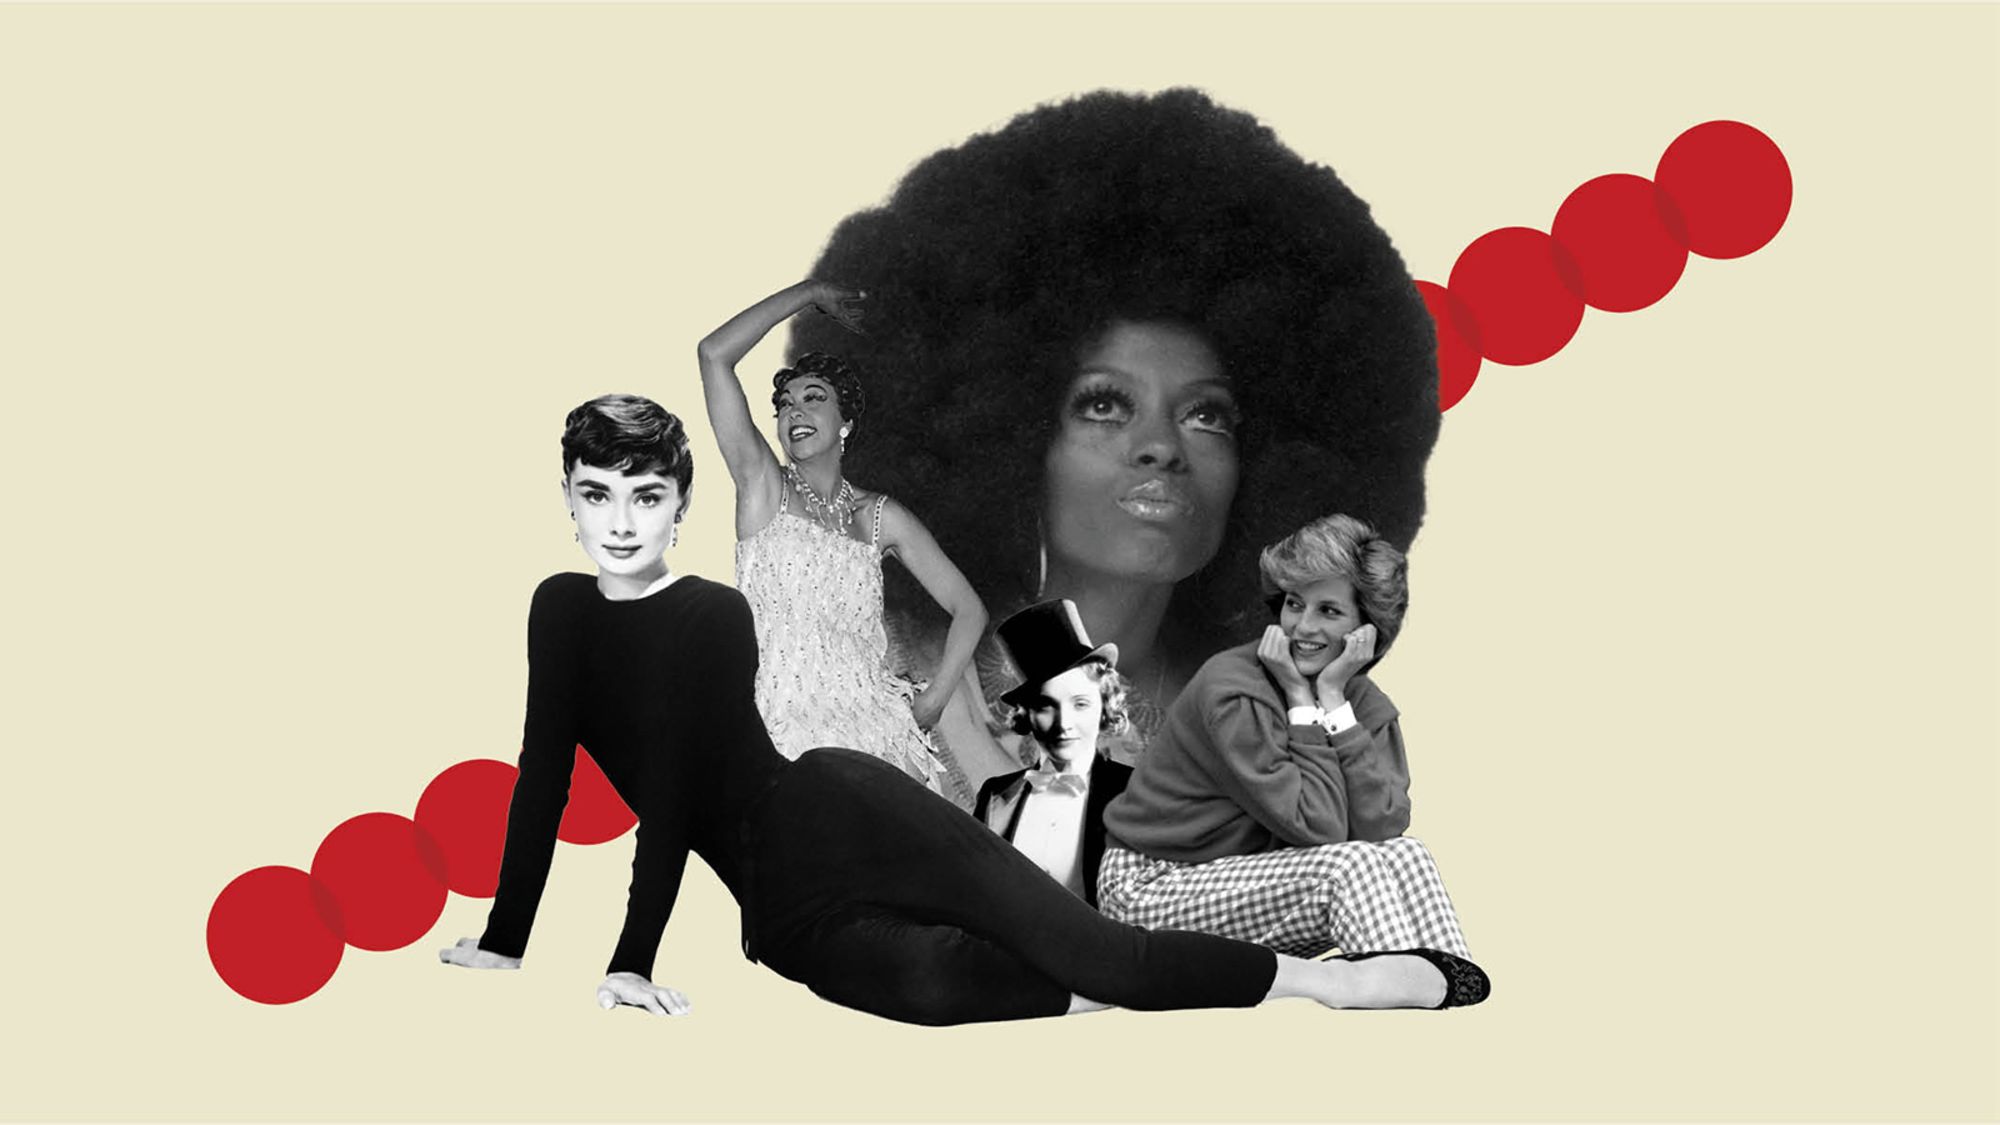 A composite image of some of the 20th-century's biggest fashion icons: Audrey Hepburn, Diana Ross, Josephine Baker, Princess Diana and Marlene Dietrich.